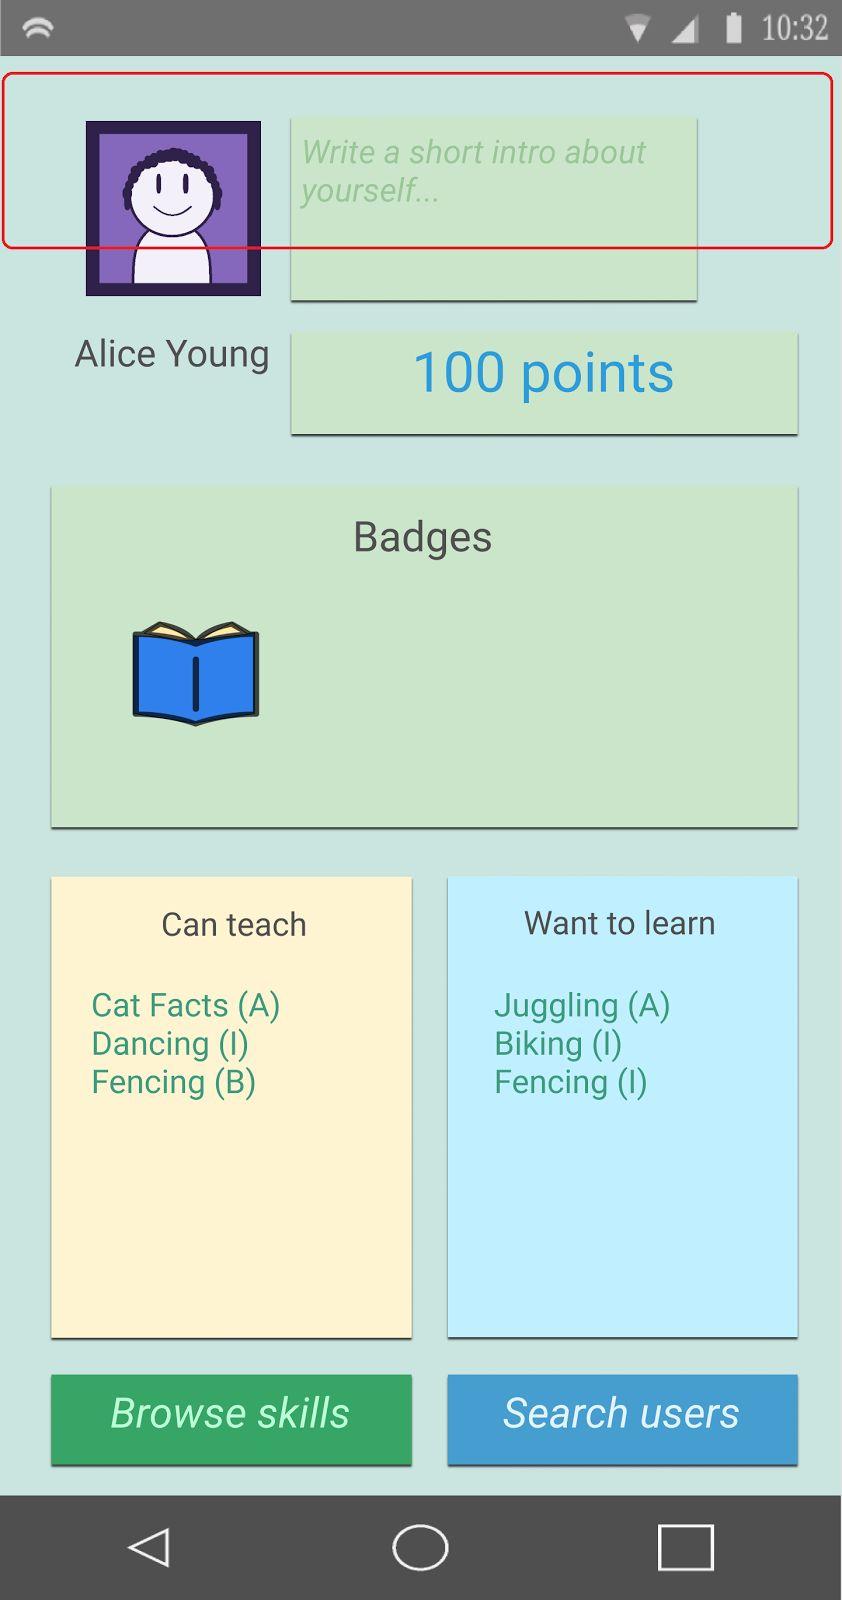 The can teach and want to learn cards in the user profile should allow for